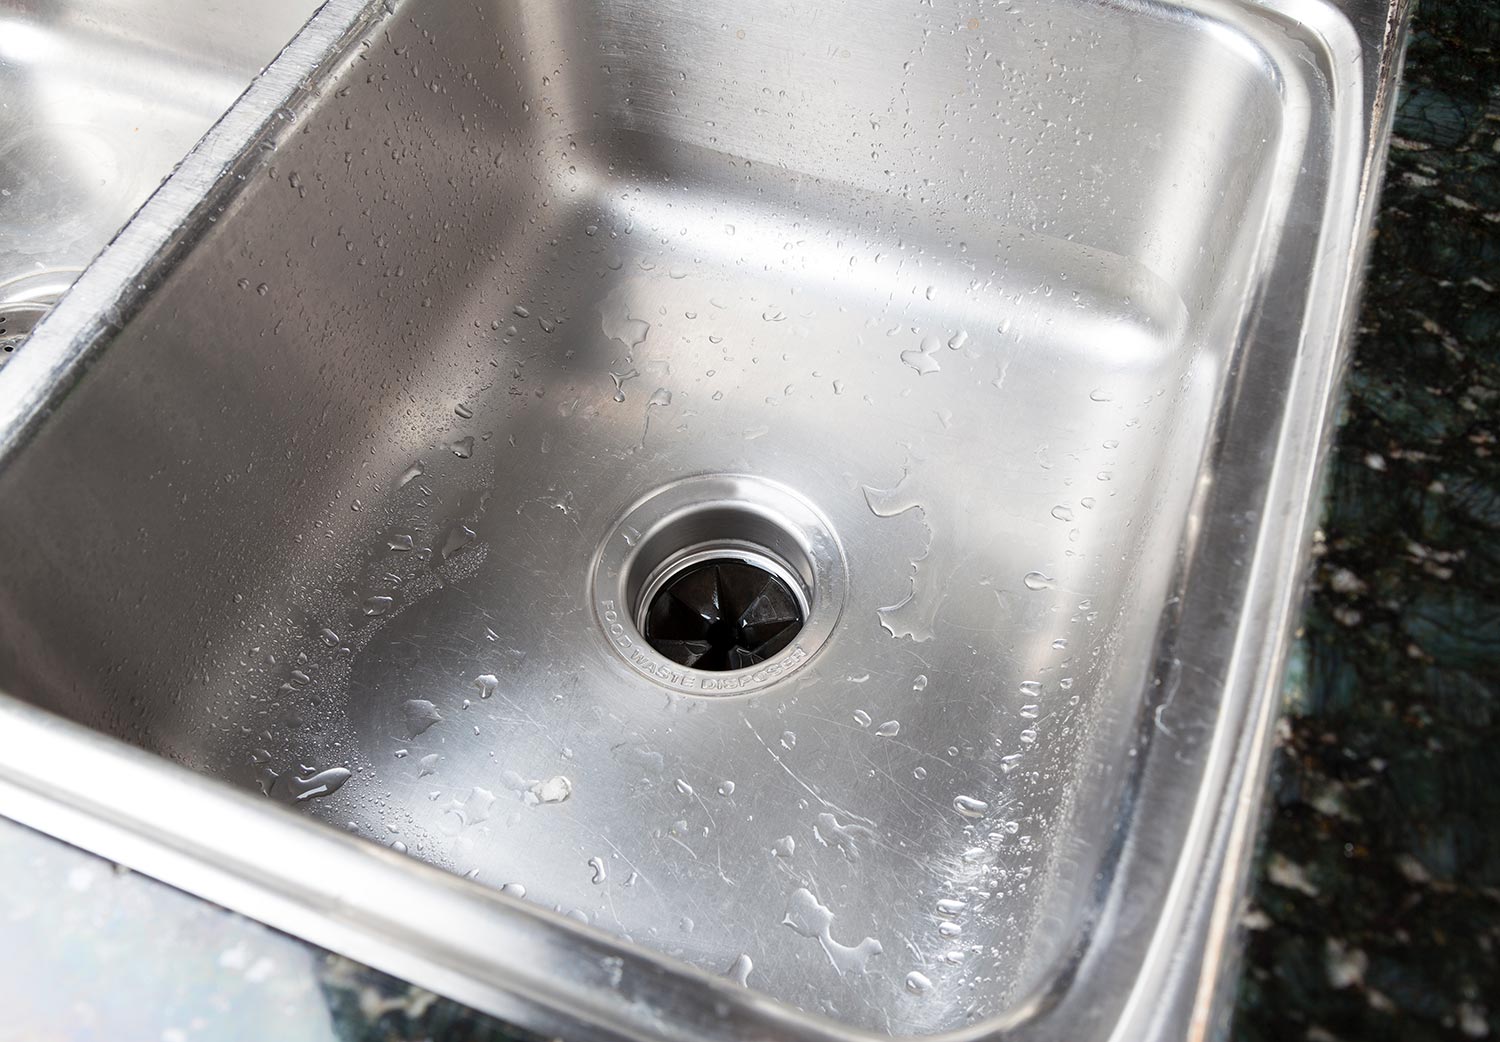 Stainless steal kitchen sink with water drops